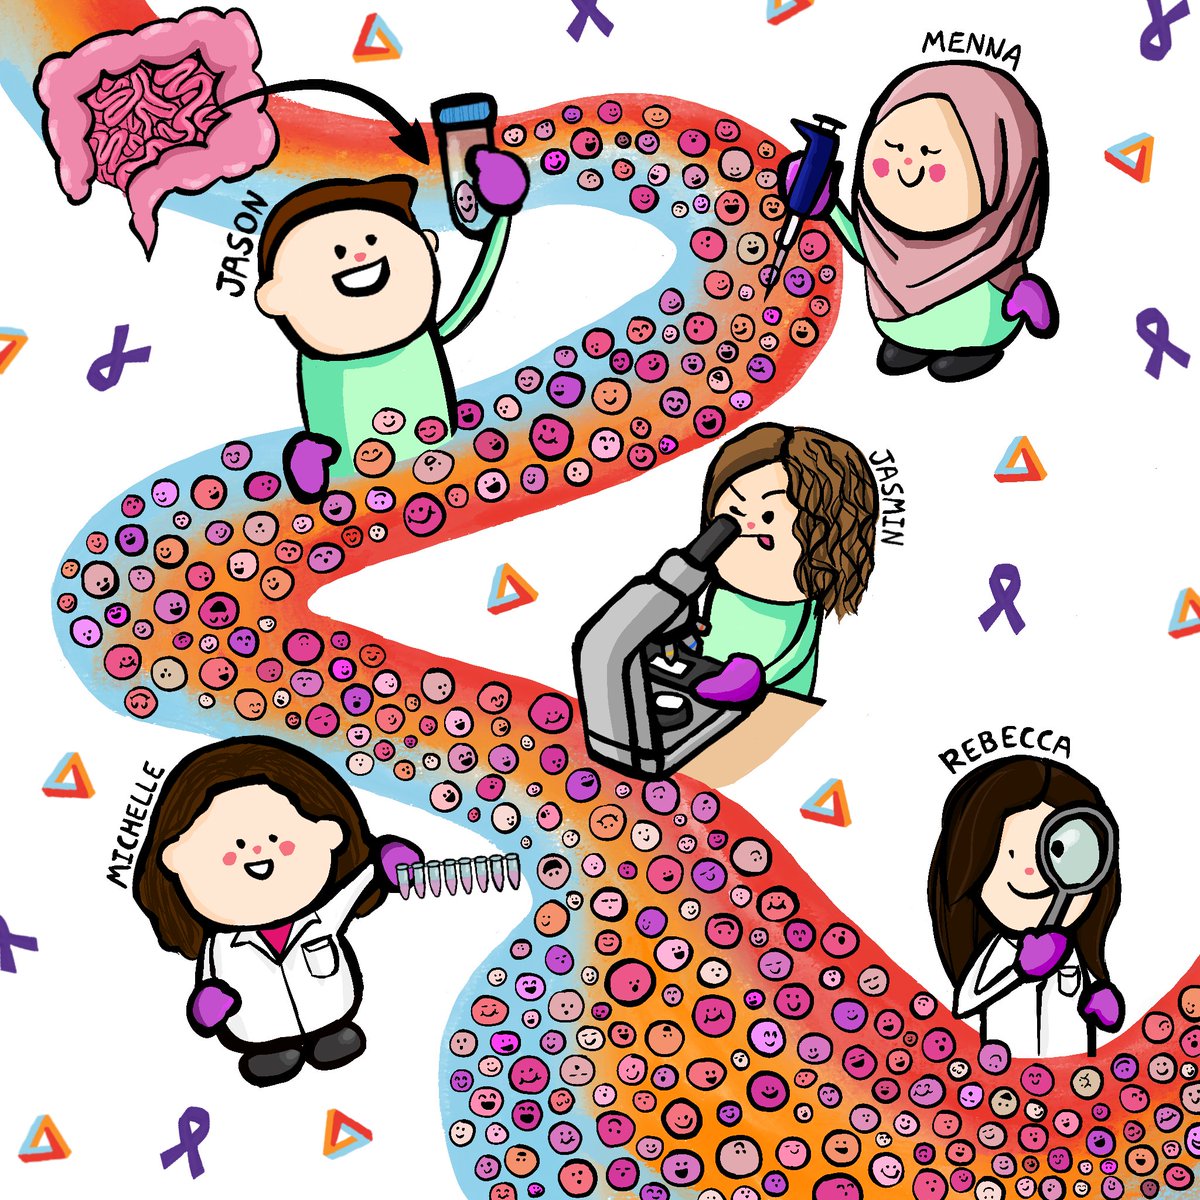 Spot me in this amazing artwork by the brilliant Harriet Banks ❤️
Single cell for IBD 